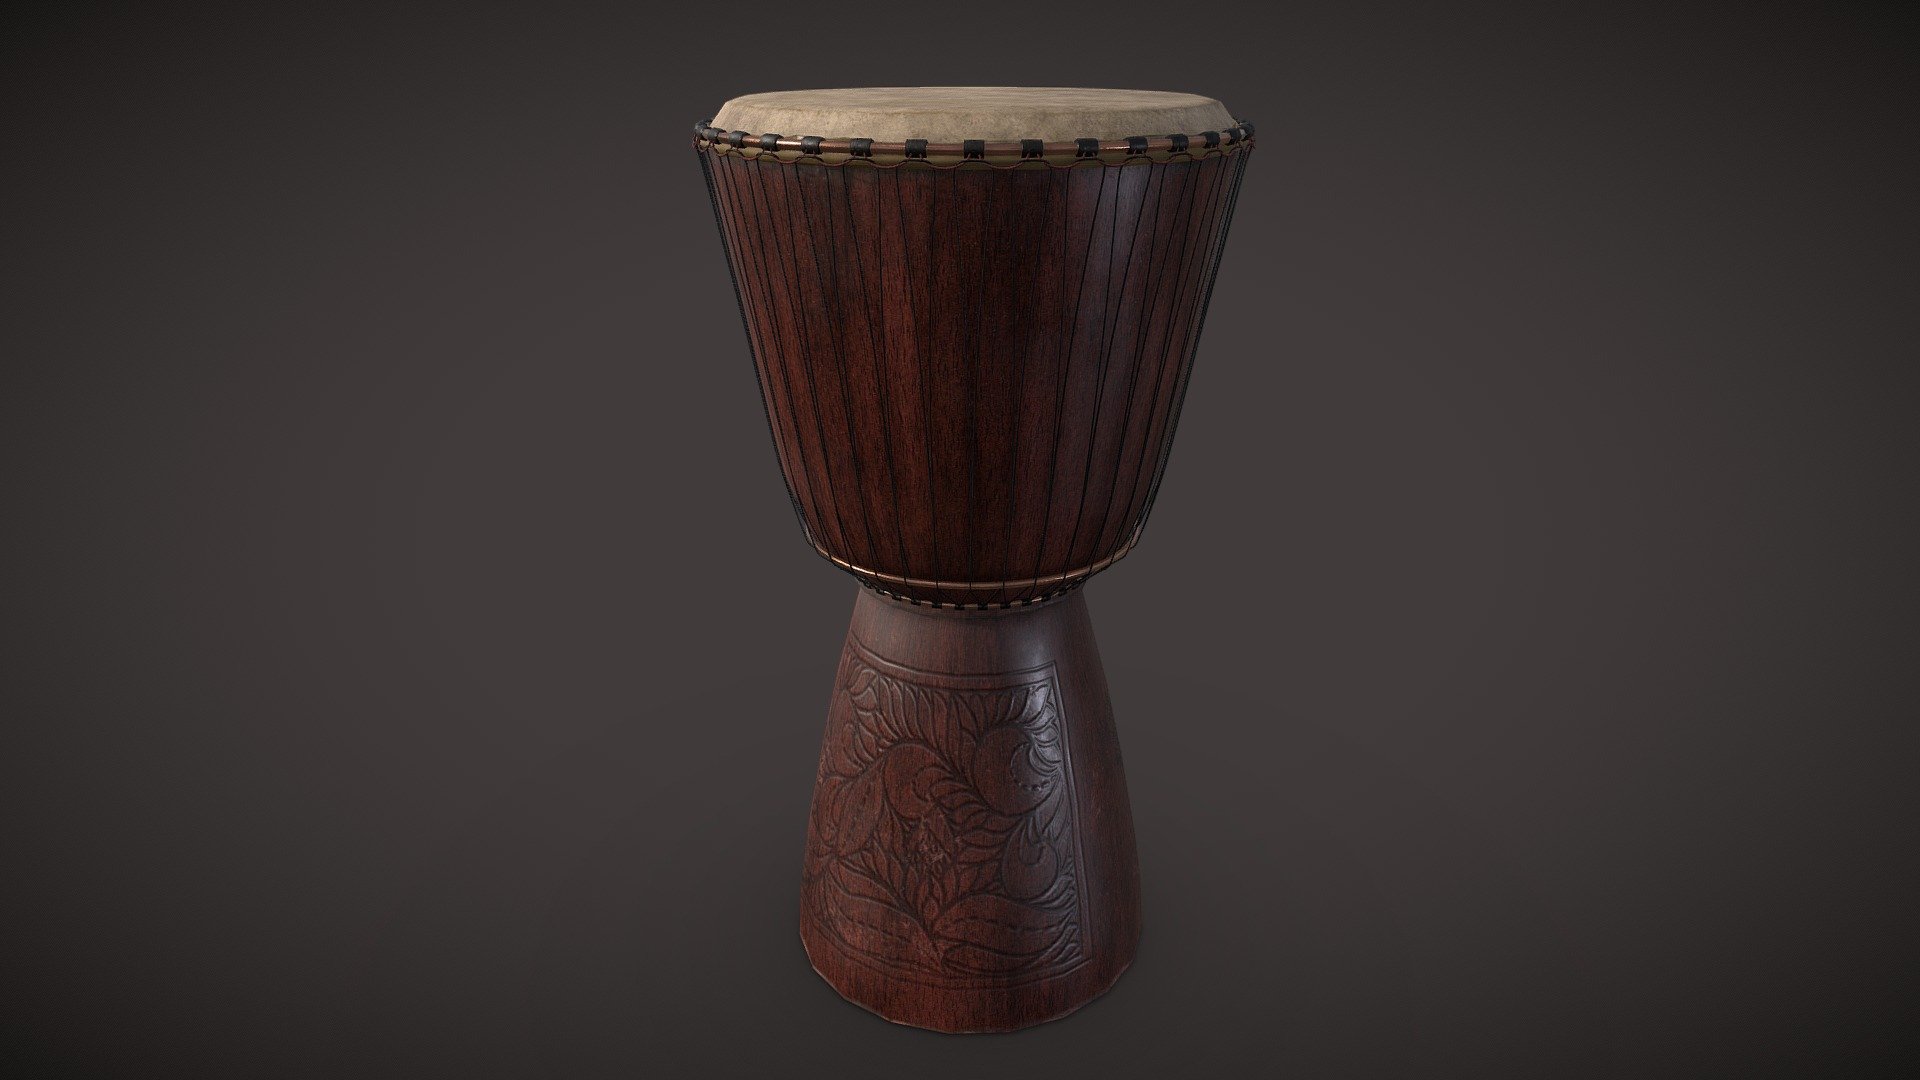 A djembe or jembe is a rope-tuned skin-covered goblet drum played with bare hands, originally from West Africa. 

The djembe can produce a wide variety of sounds, making it an extremely versatile drum. The drum is very loud, allowing it to be heard clearly as a solo instrument over a large percussion ensemble 3d model